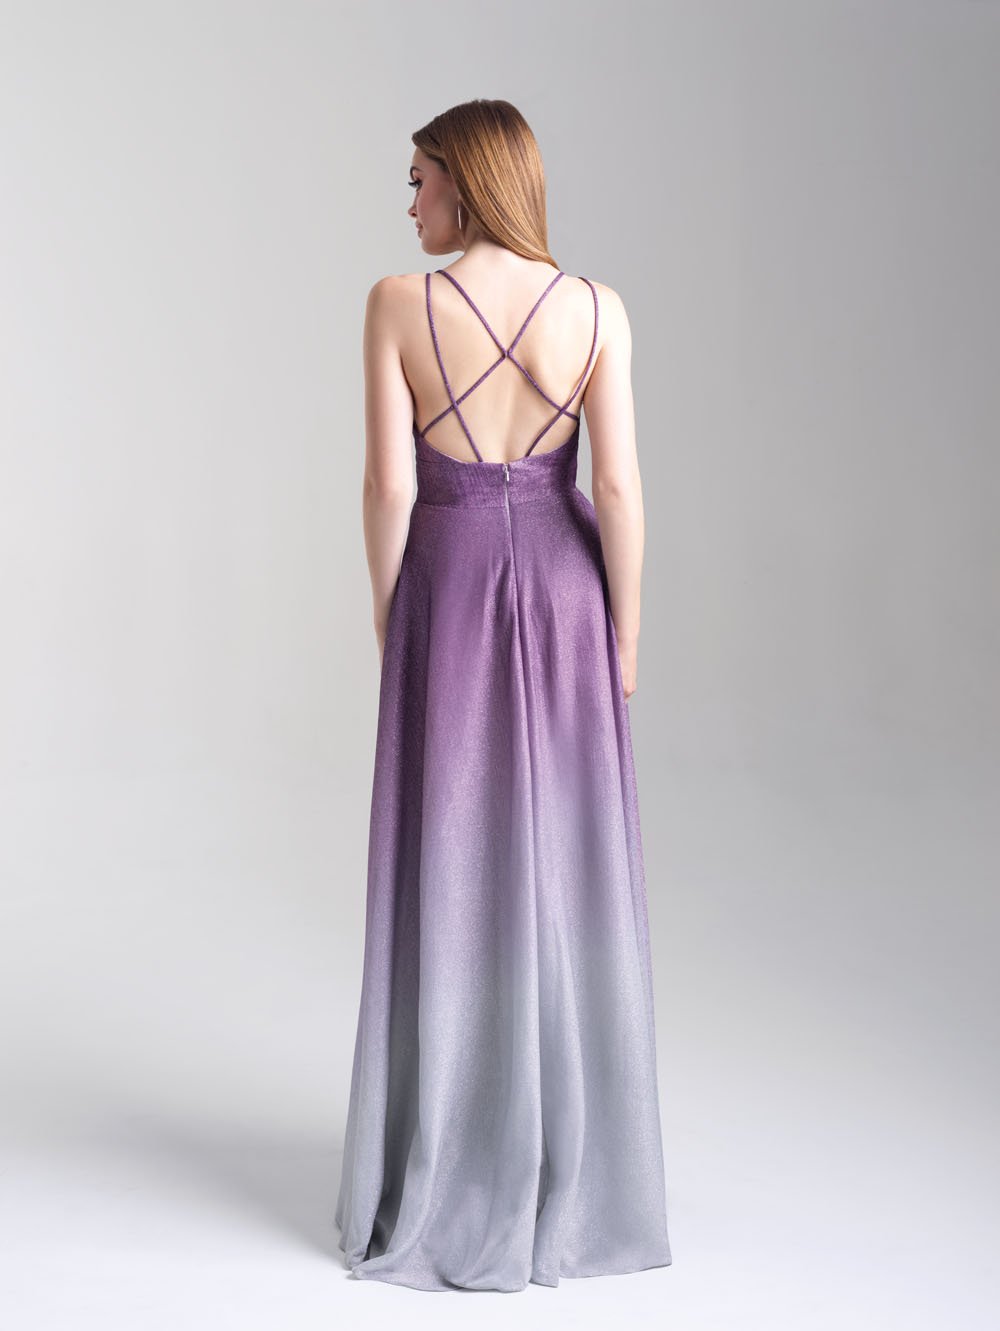 Madison James 20-313 dress images in these colors: Grey, Lavender.